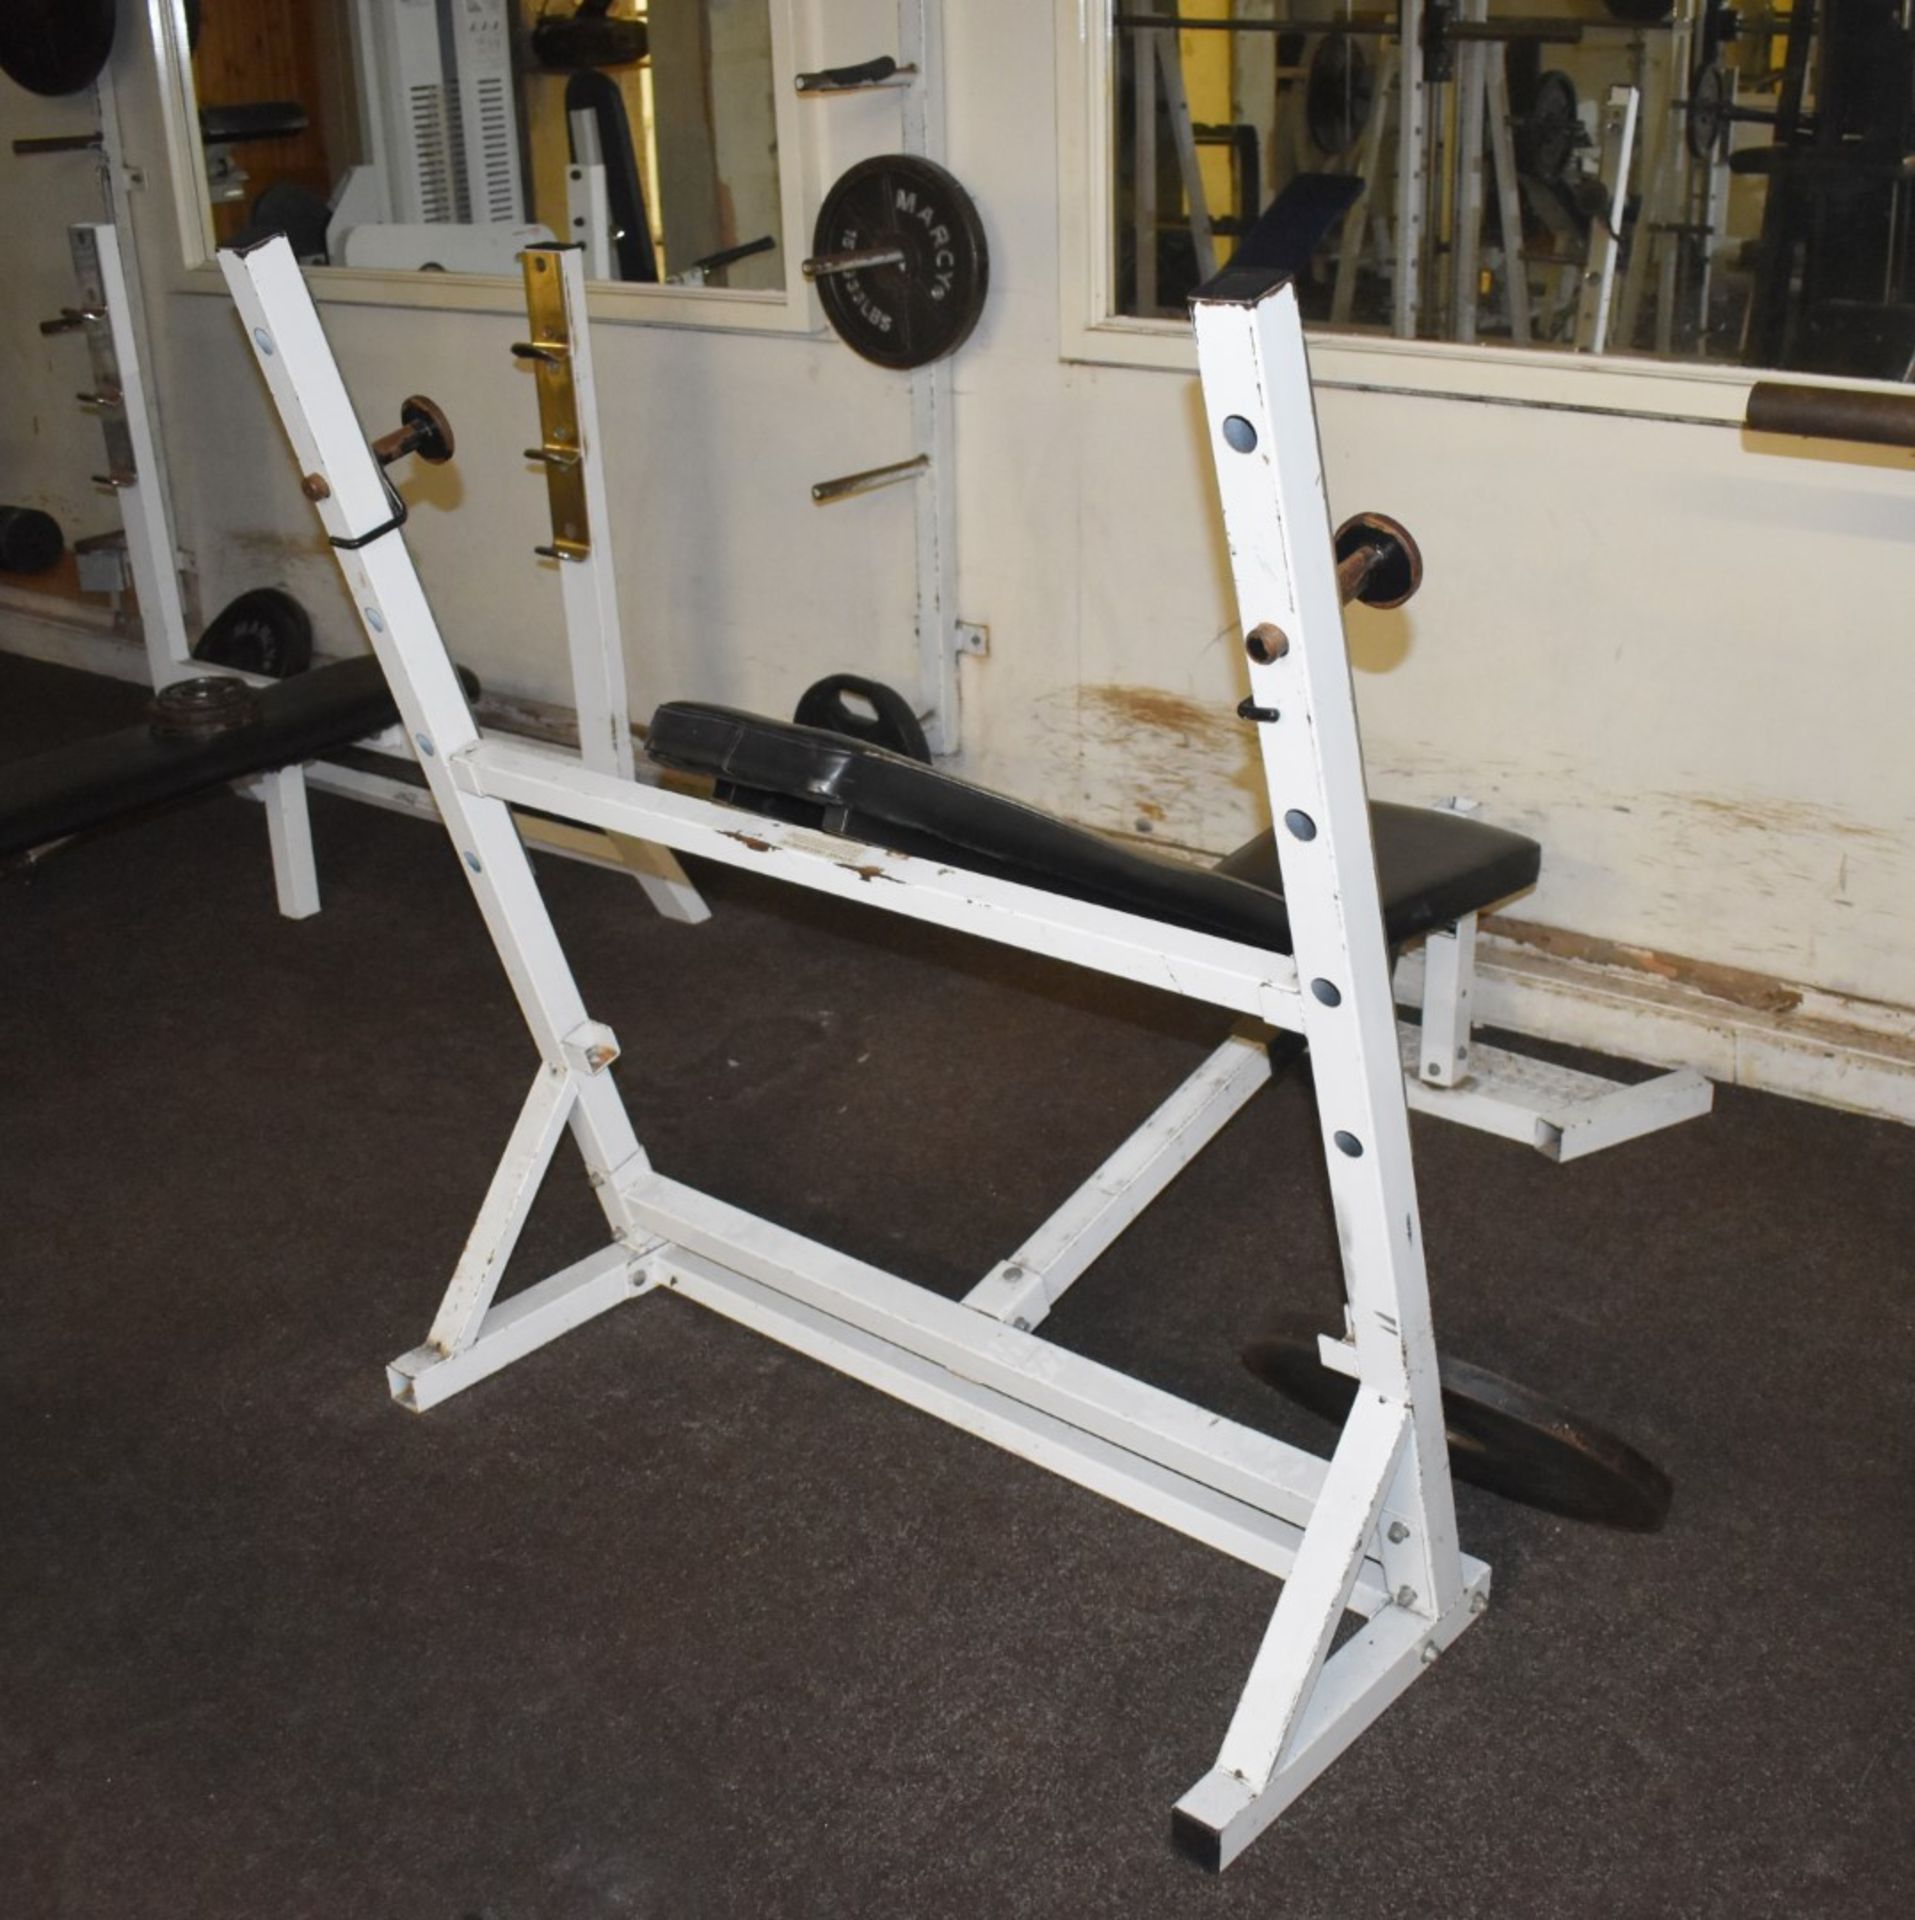 Contents of Bodybuilding and Strongman Gym - Includes Approx 30 Pieces of Gym Equipment, Floor Mats, - Image 18 of 31